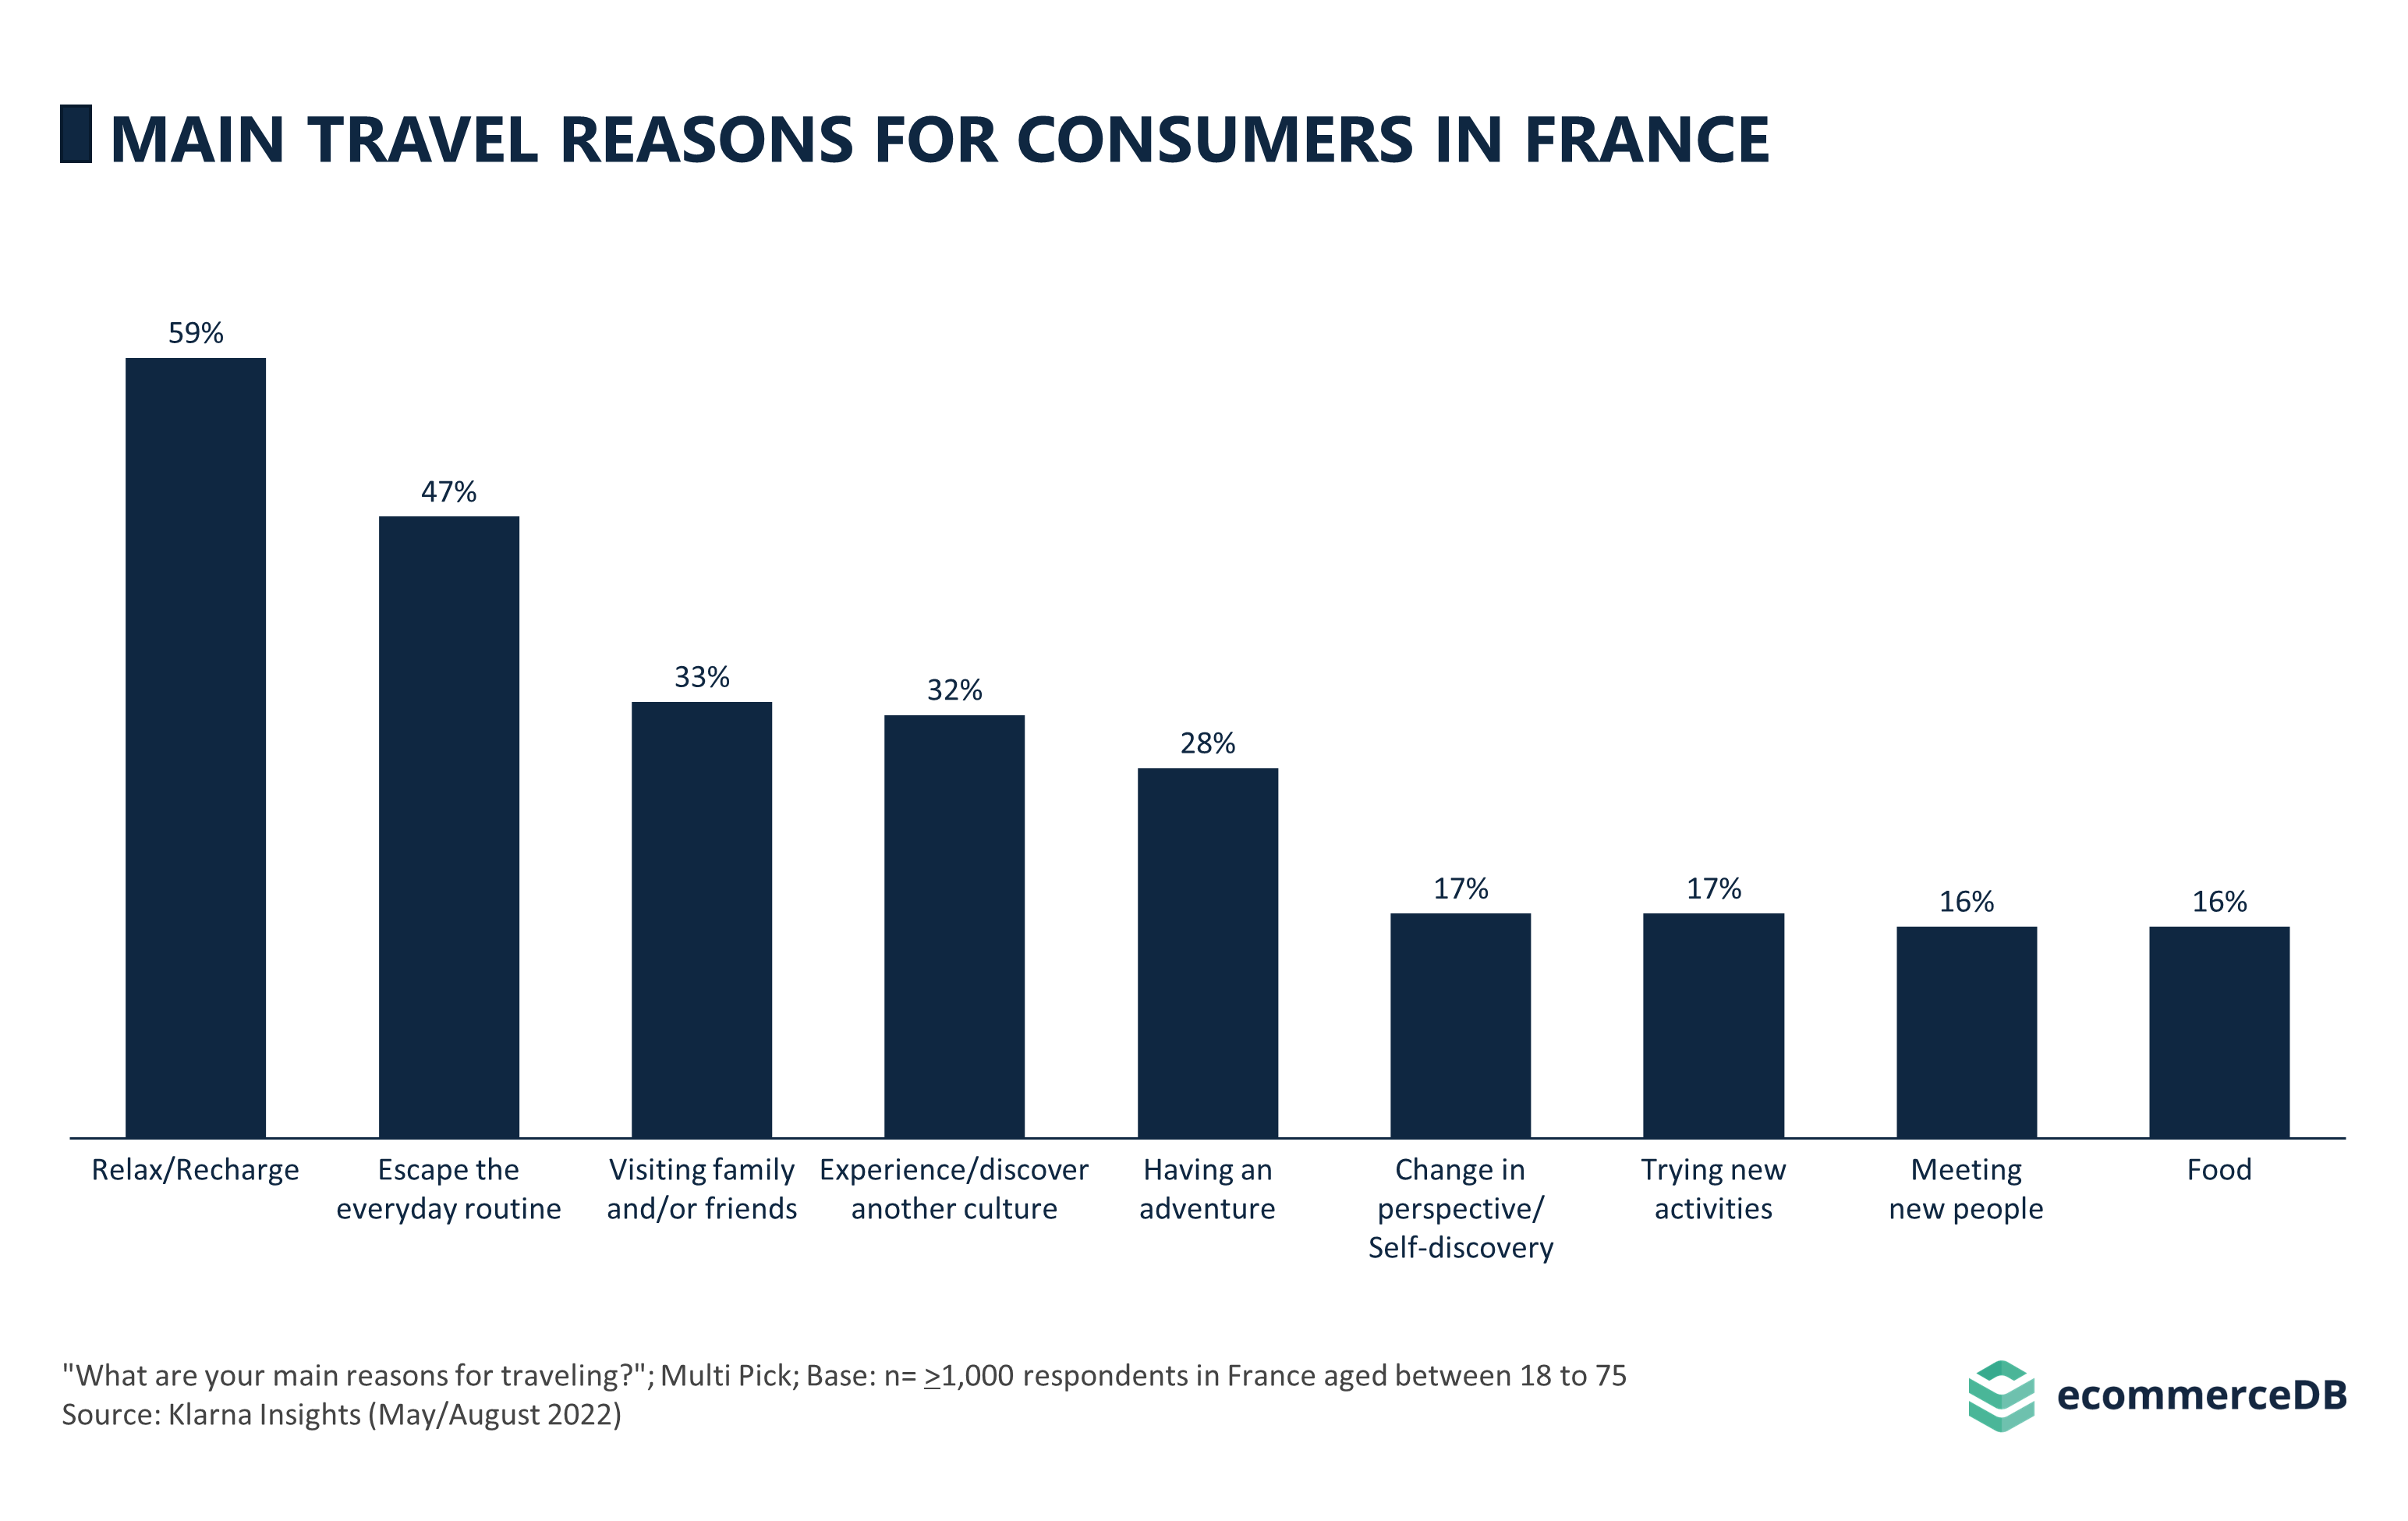 Main Travel Reasons for Consumers in France